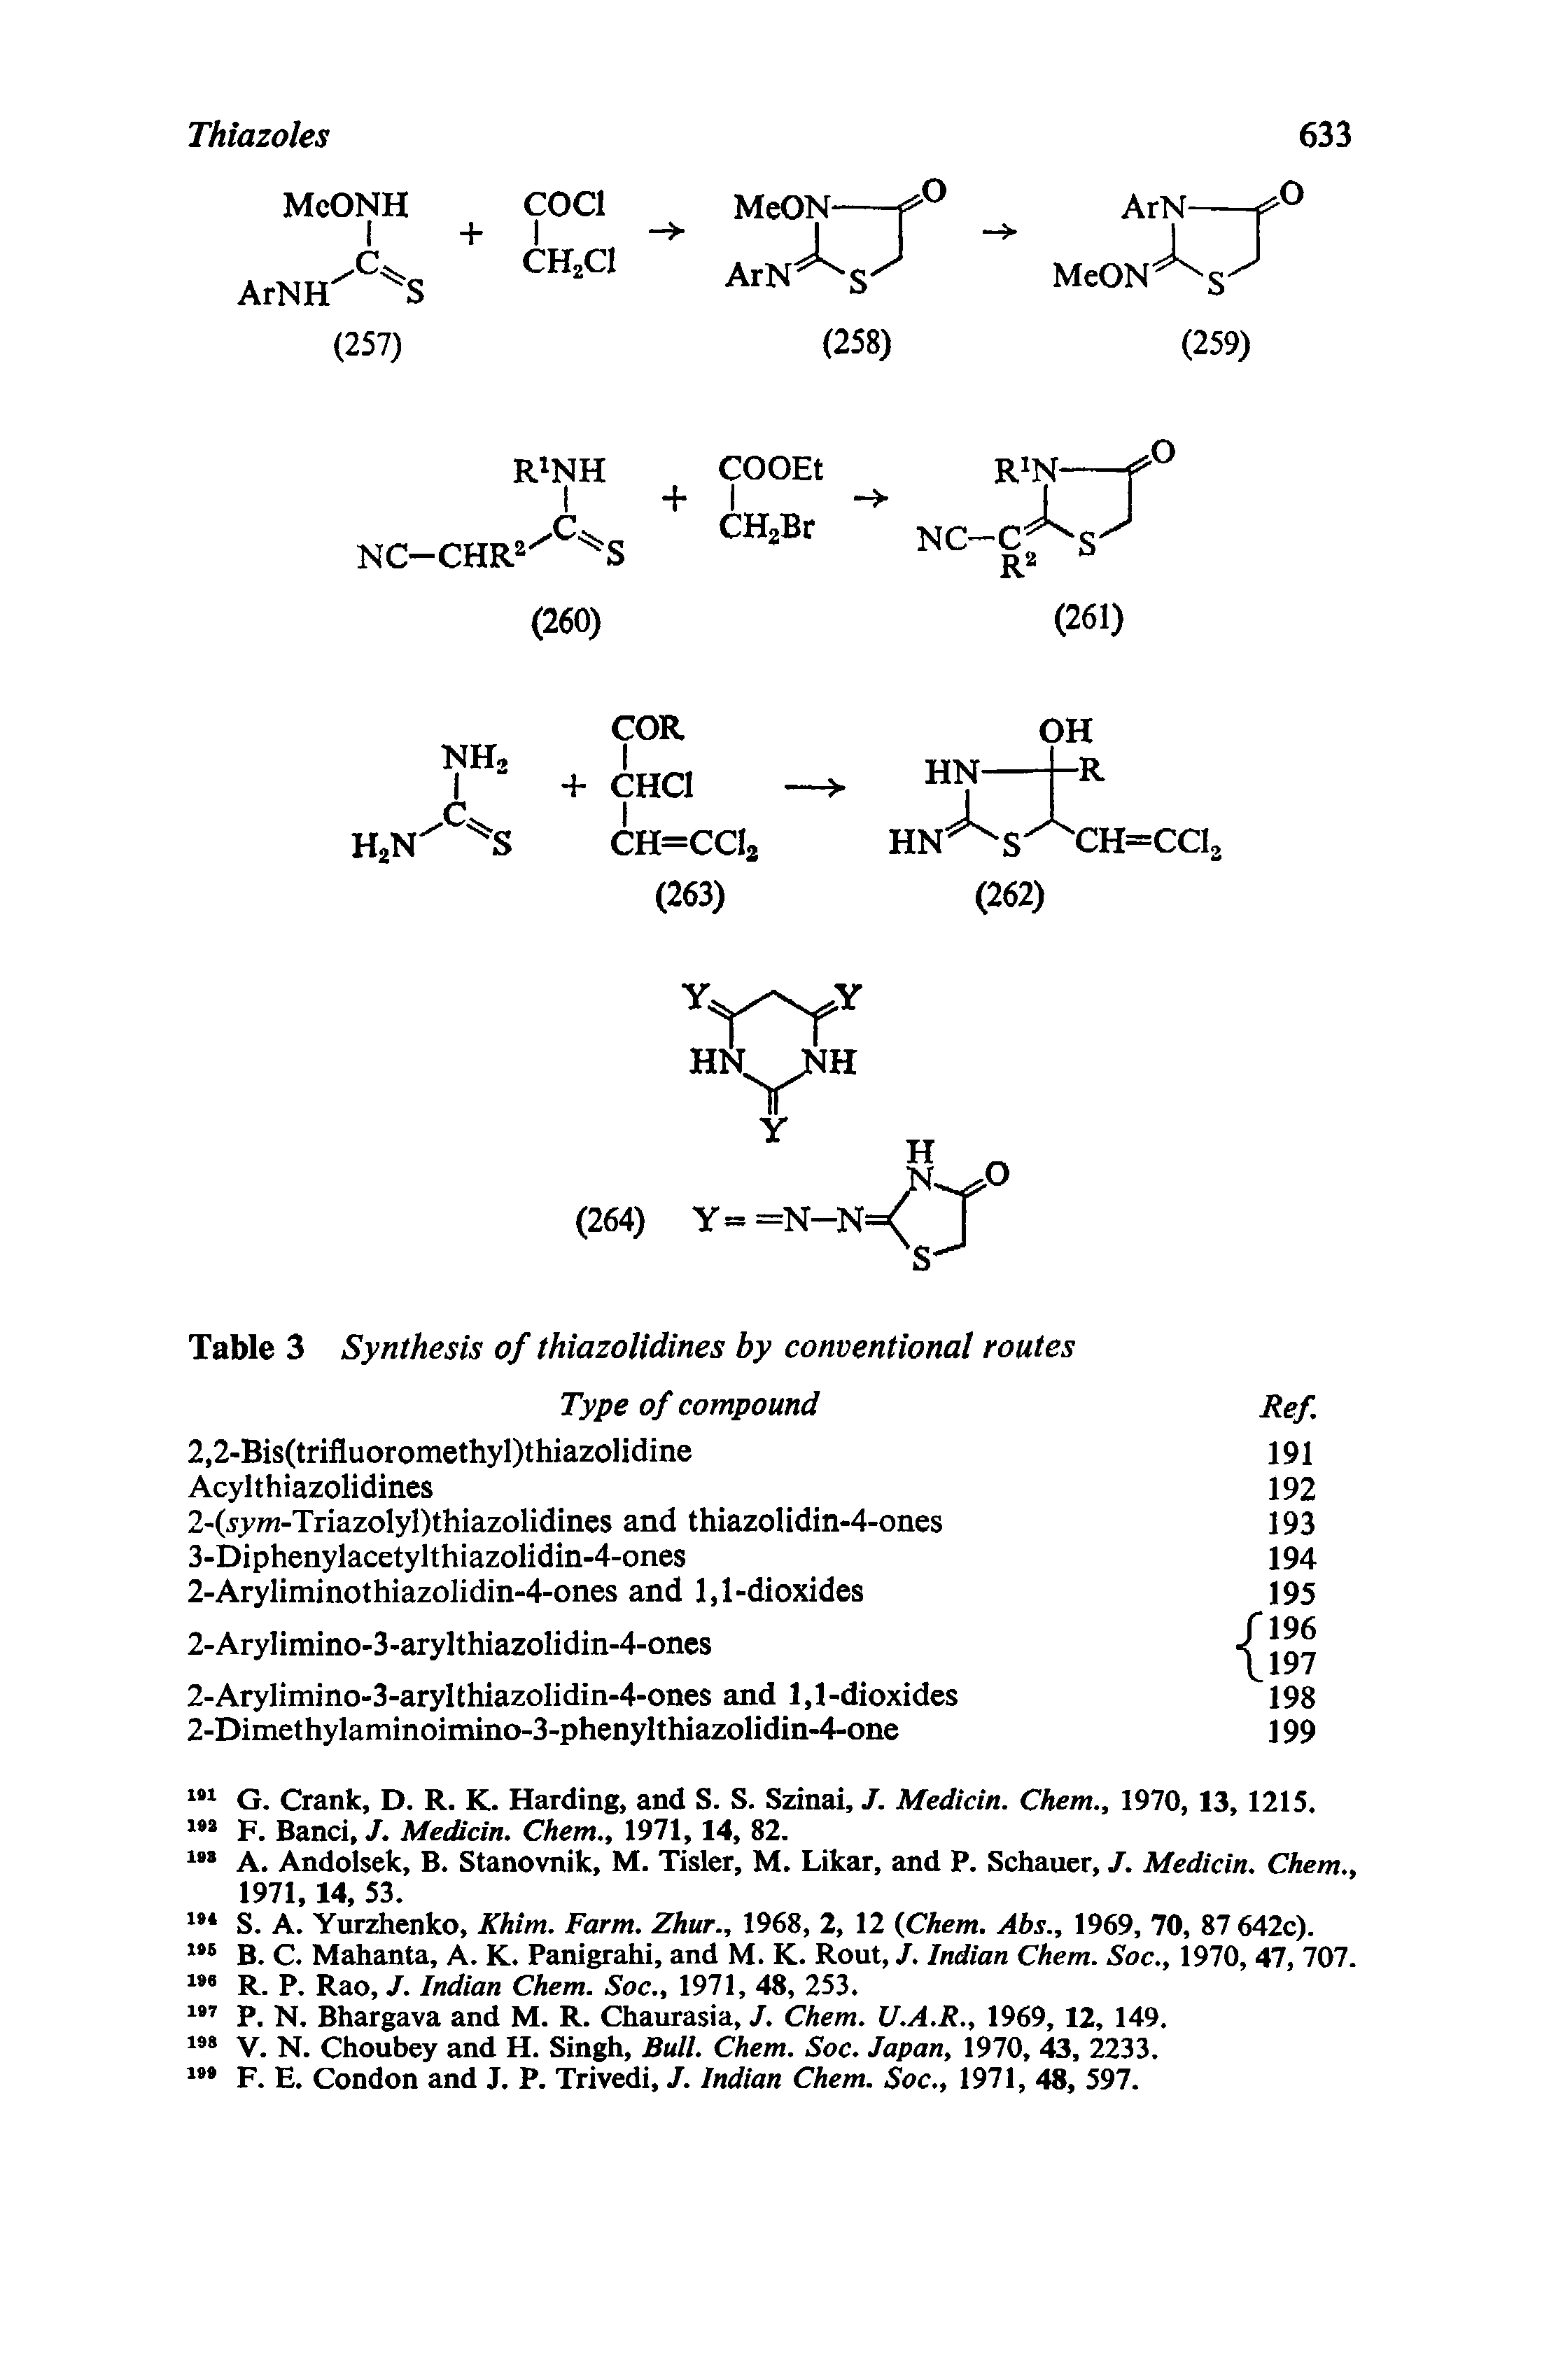 Table 3 Synthesis of thiazolidines by conventional routes Type of compound...